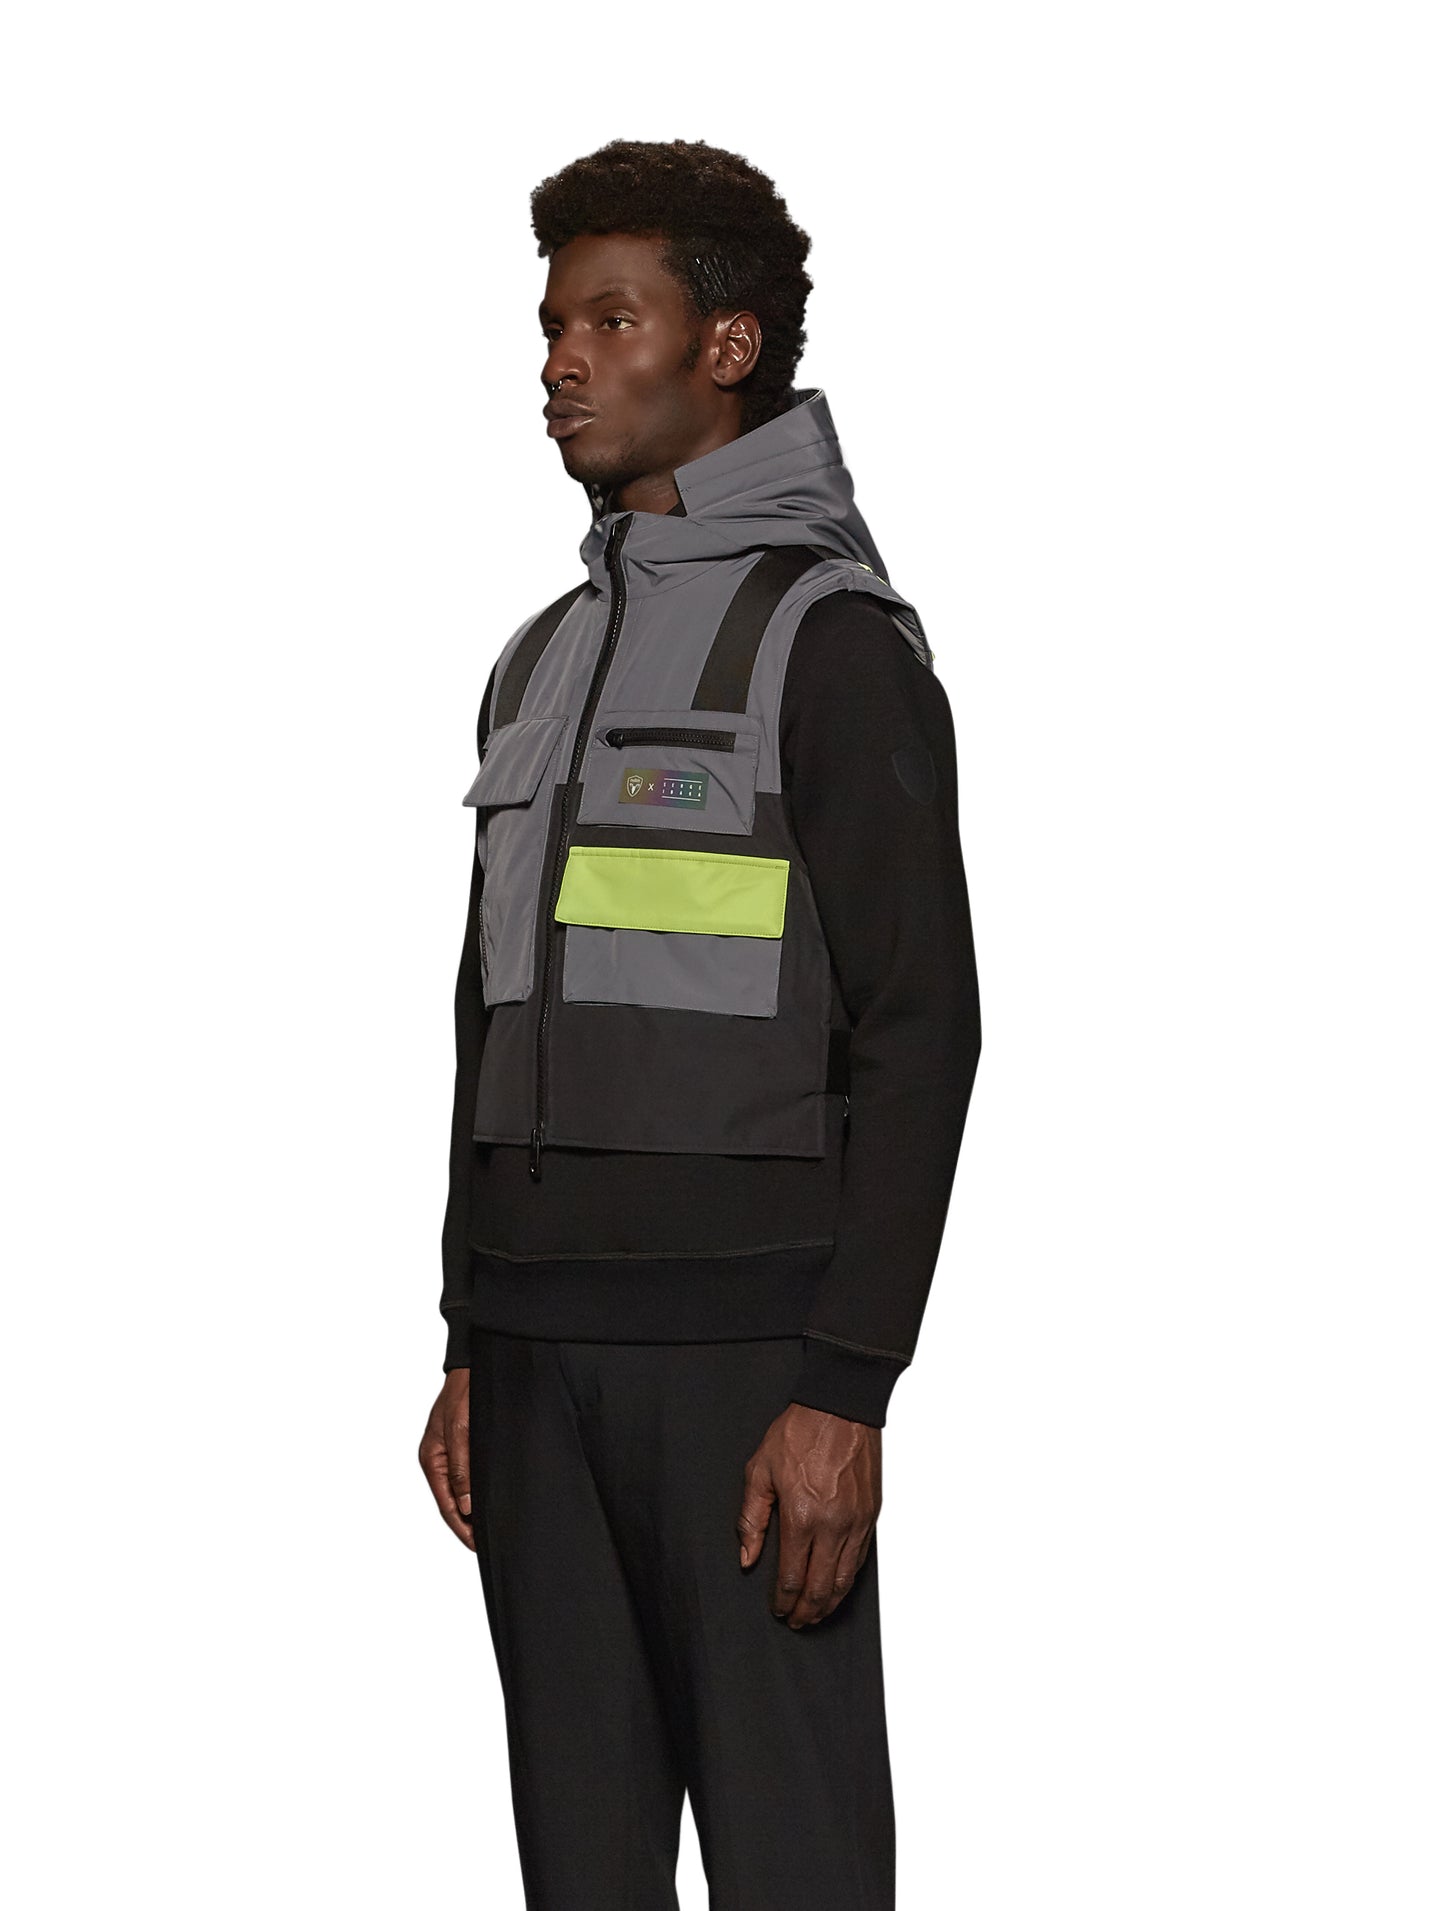 Unisex waist length hooded tactical vest with multiple exterior pockets on front and back, and adjustable side webbing fasteners, colour blocked in Concrete/Black